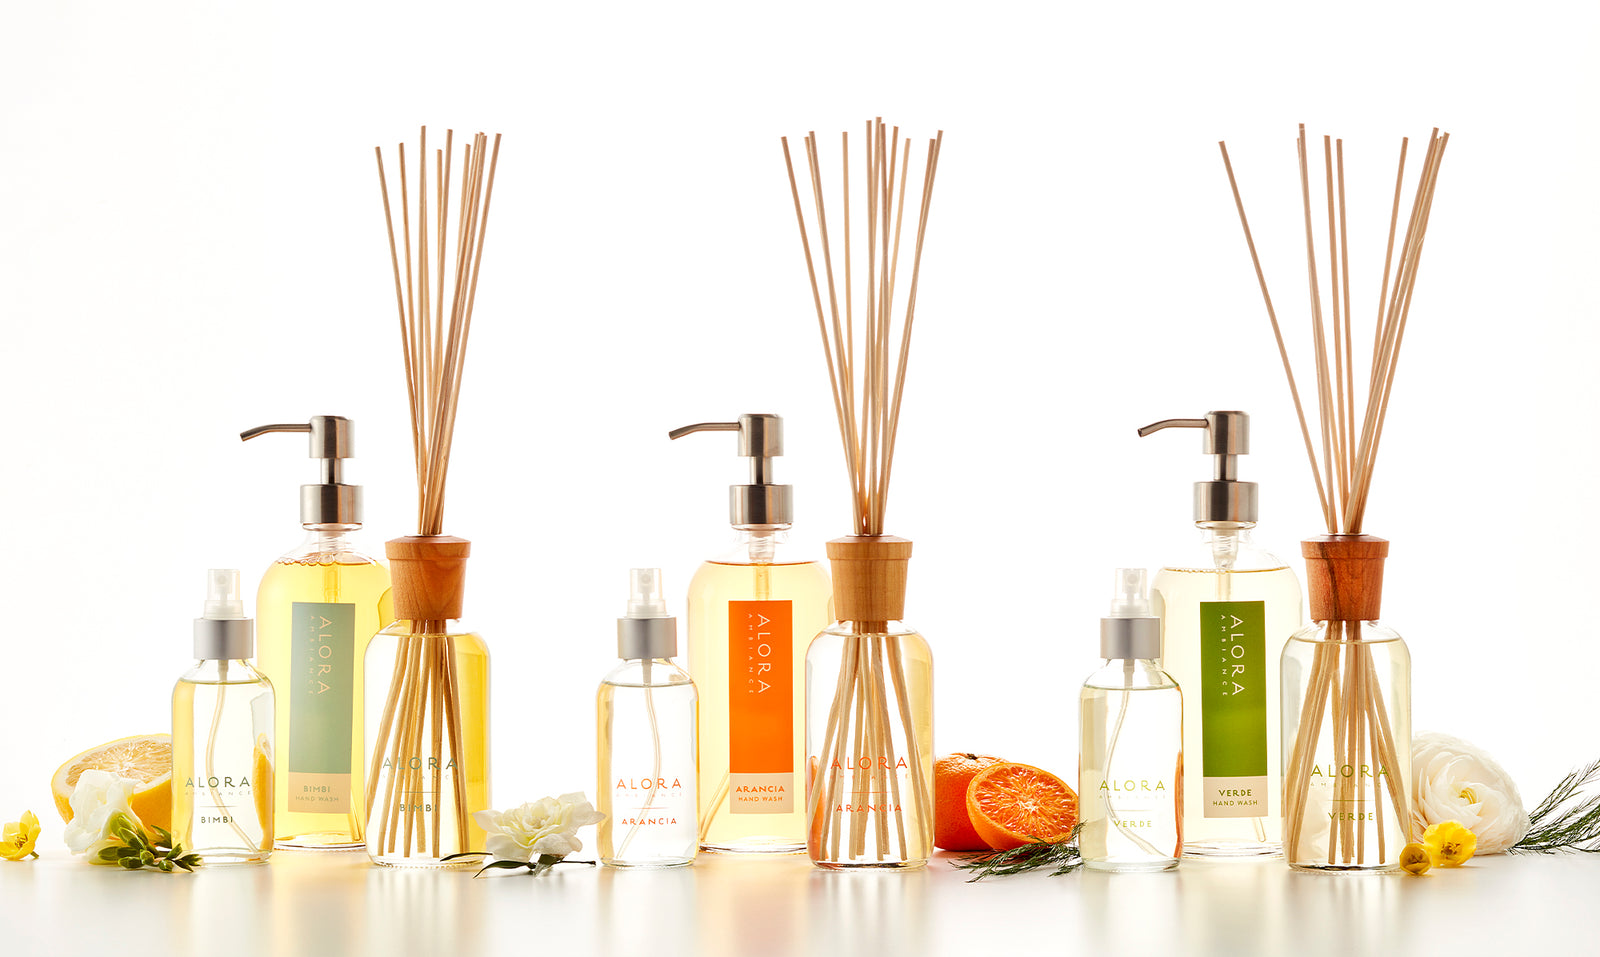 three reed diffusers, three hand washes and three room sprays bundled together with fruit and floral props